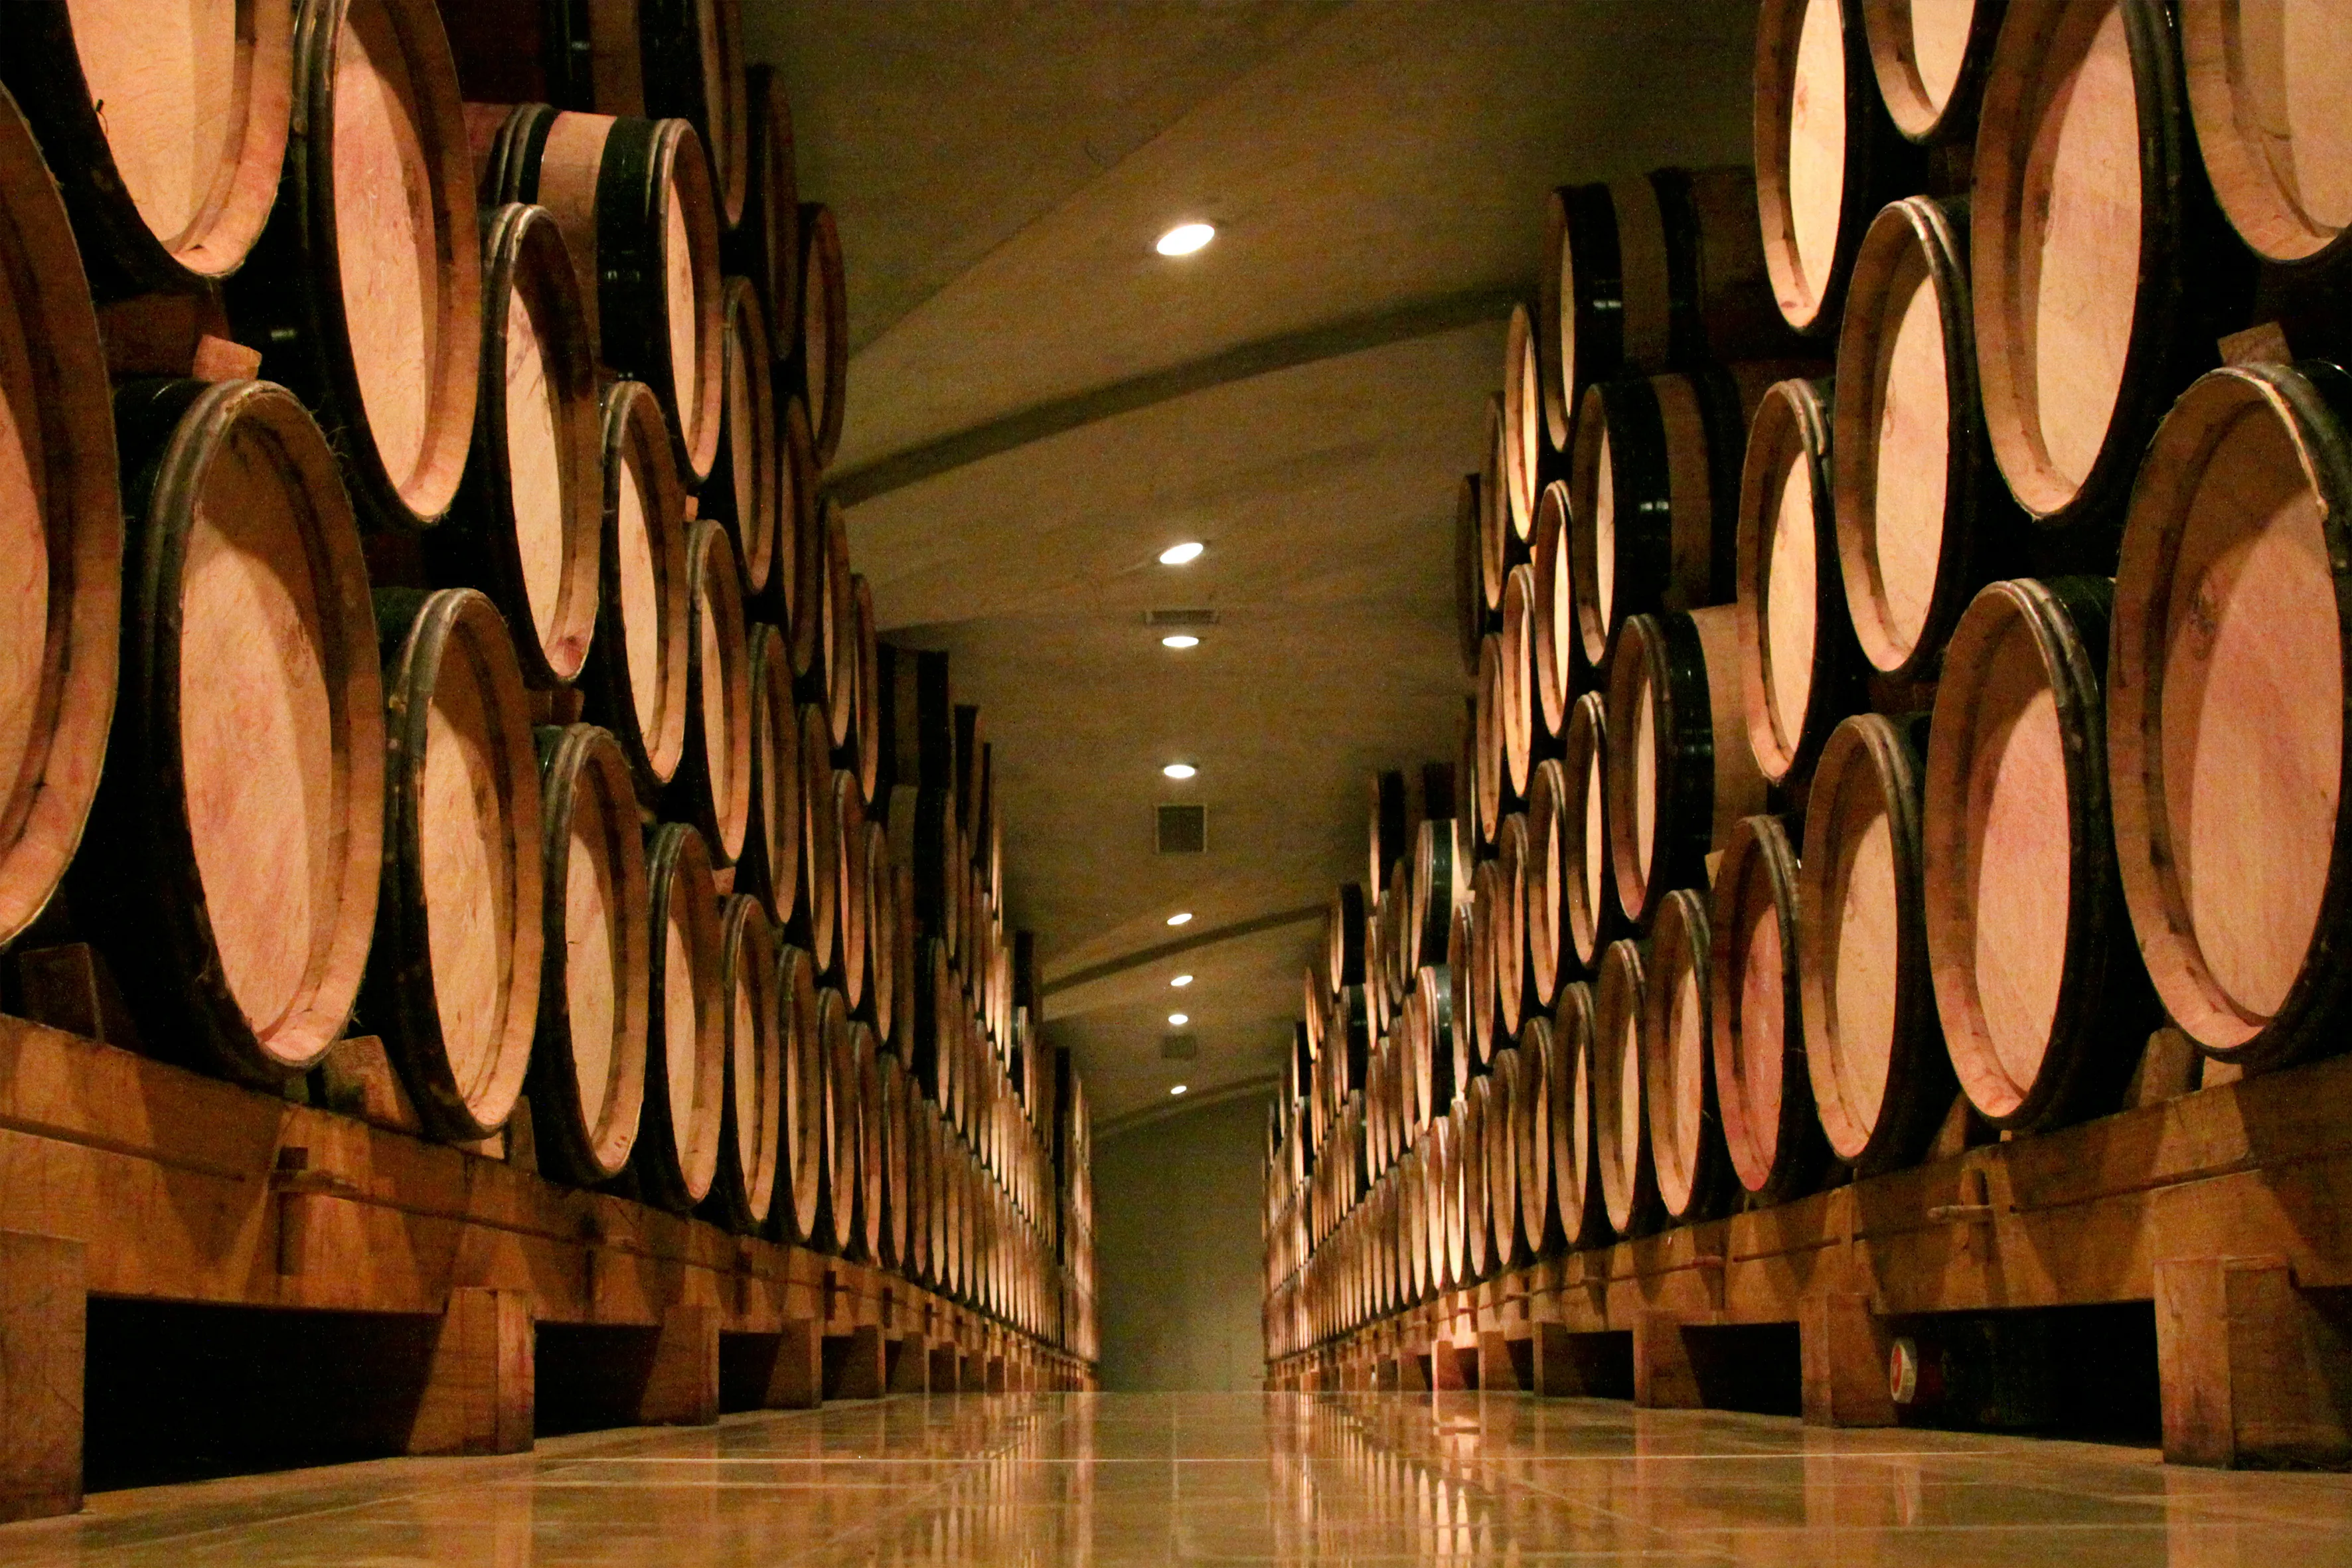 Storage of the barrels of the Domaine E.Guigal.